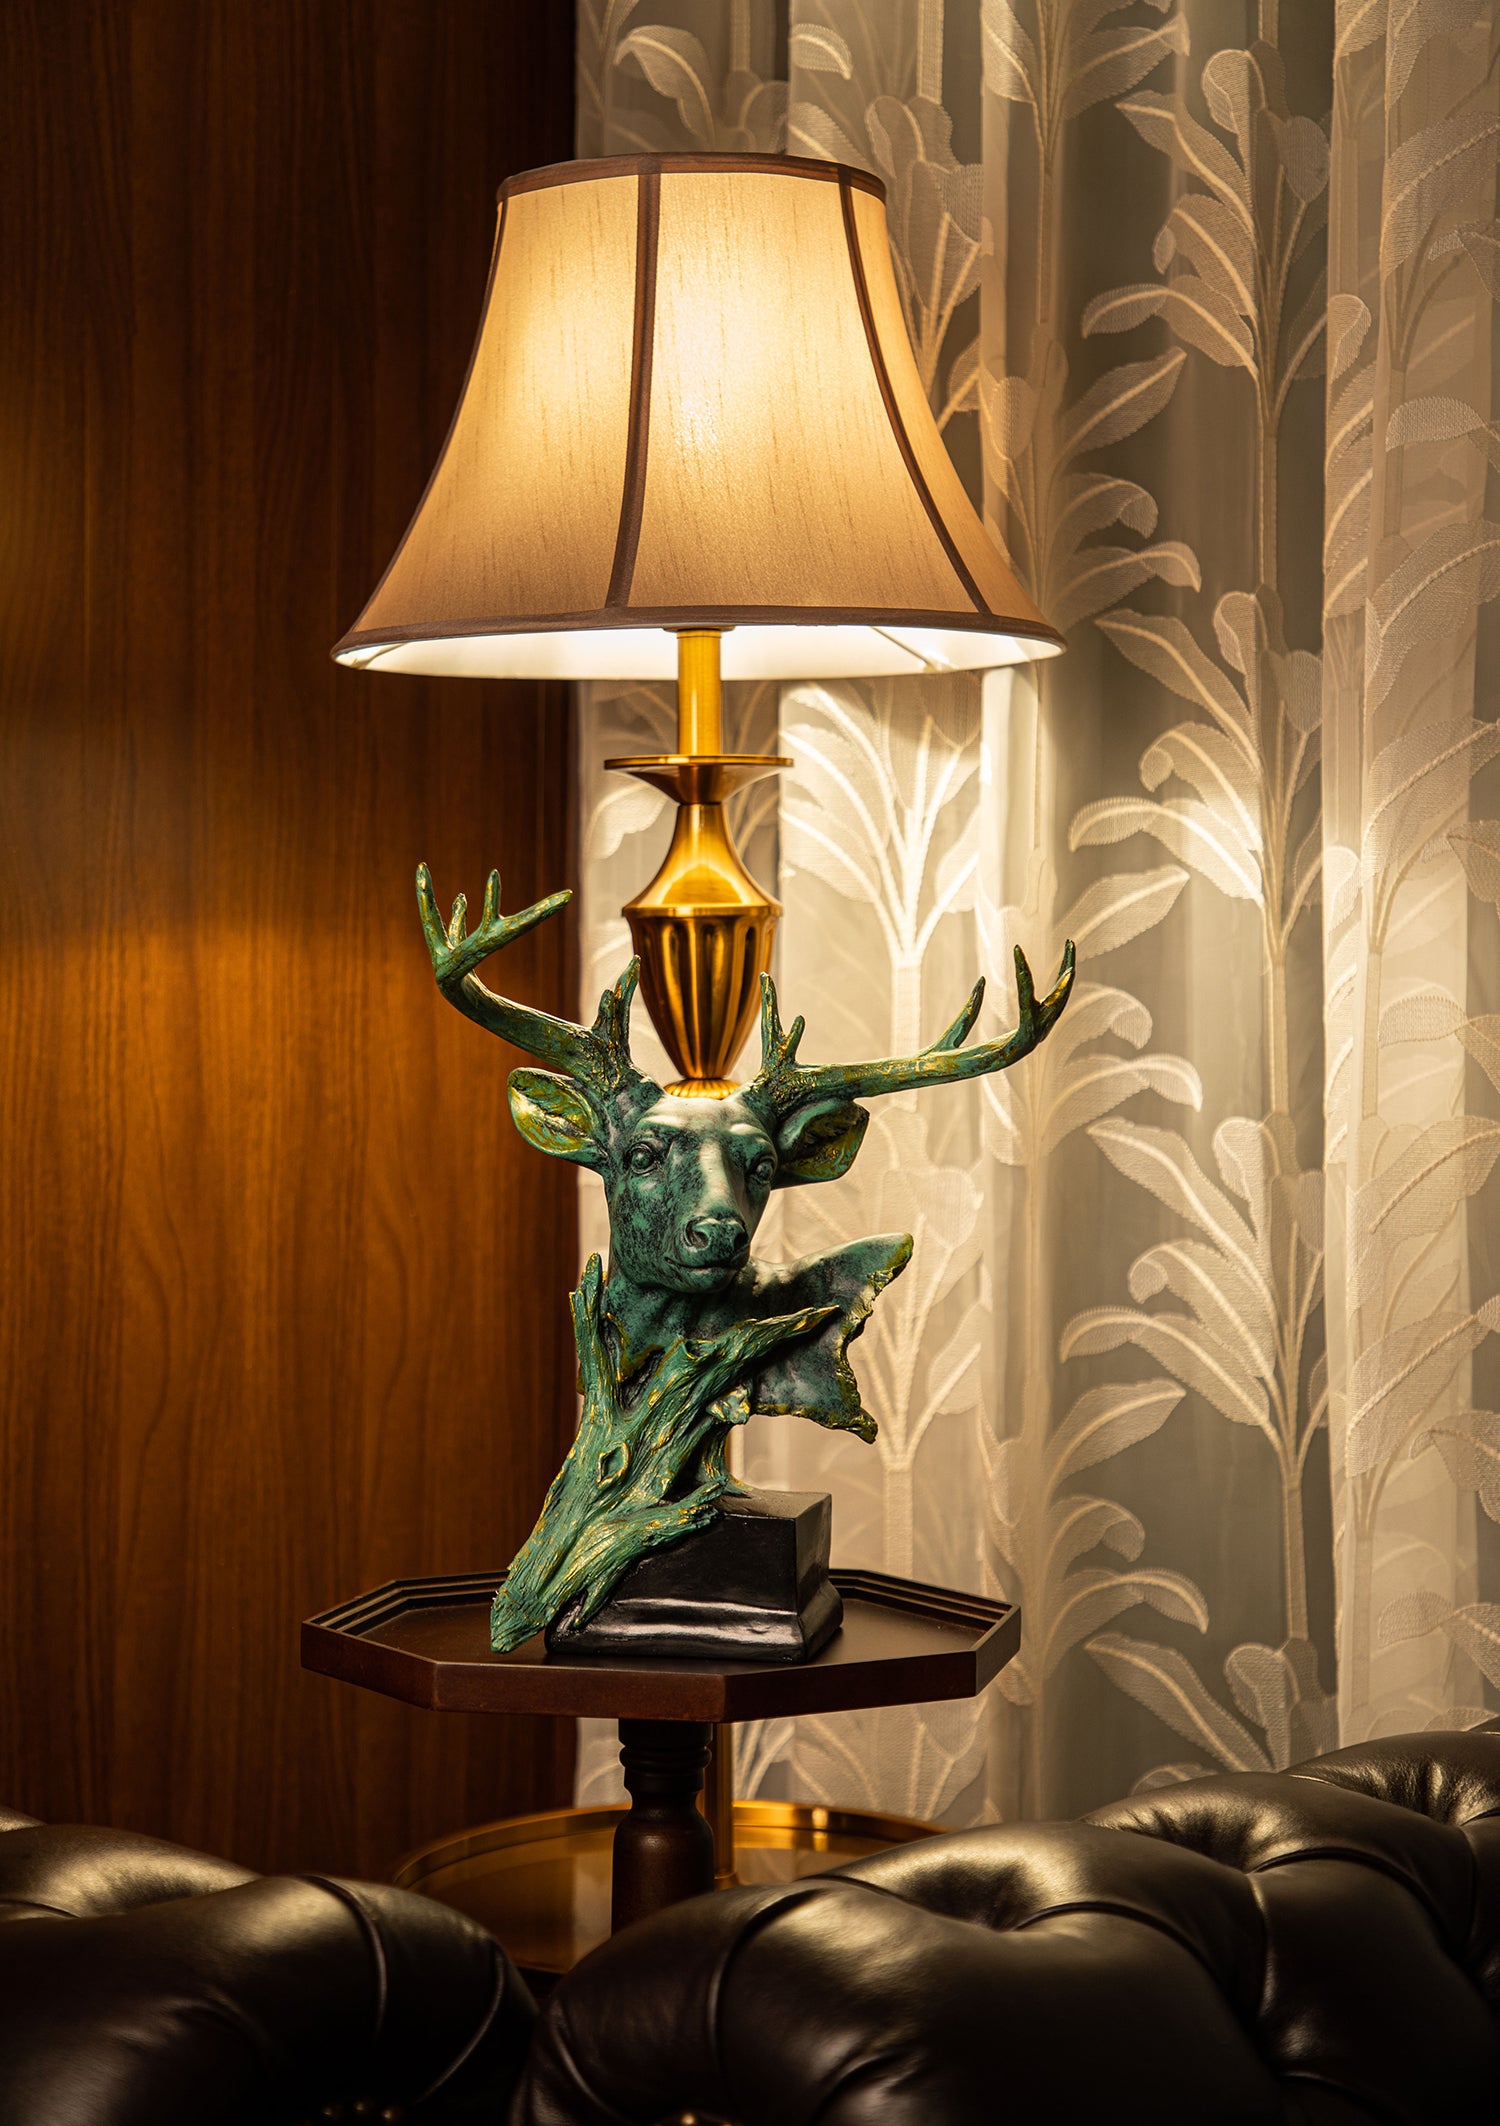 The sculpture is meticulously crafted, with intricate details that showcase the natural beauty of the deer.